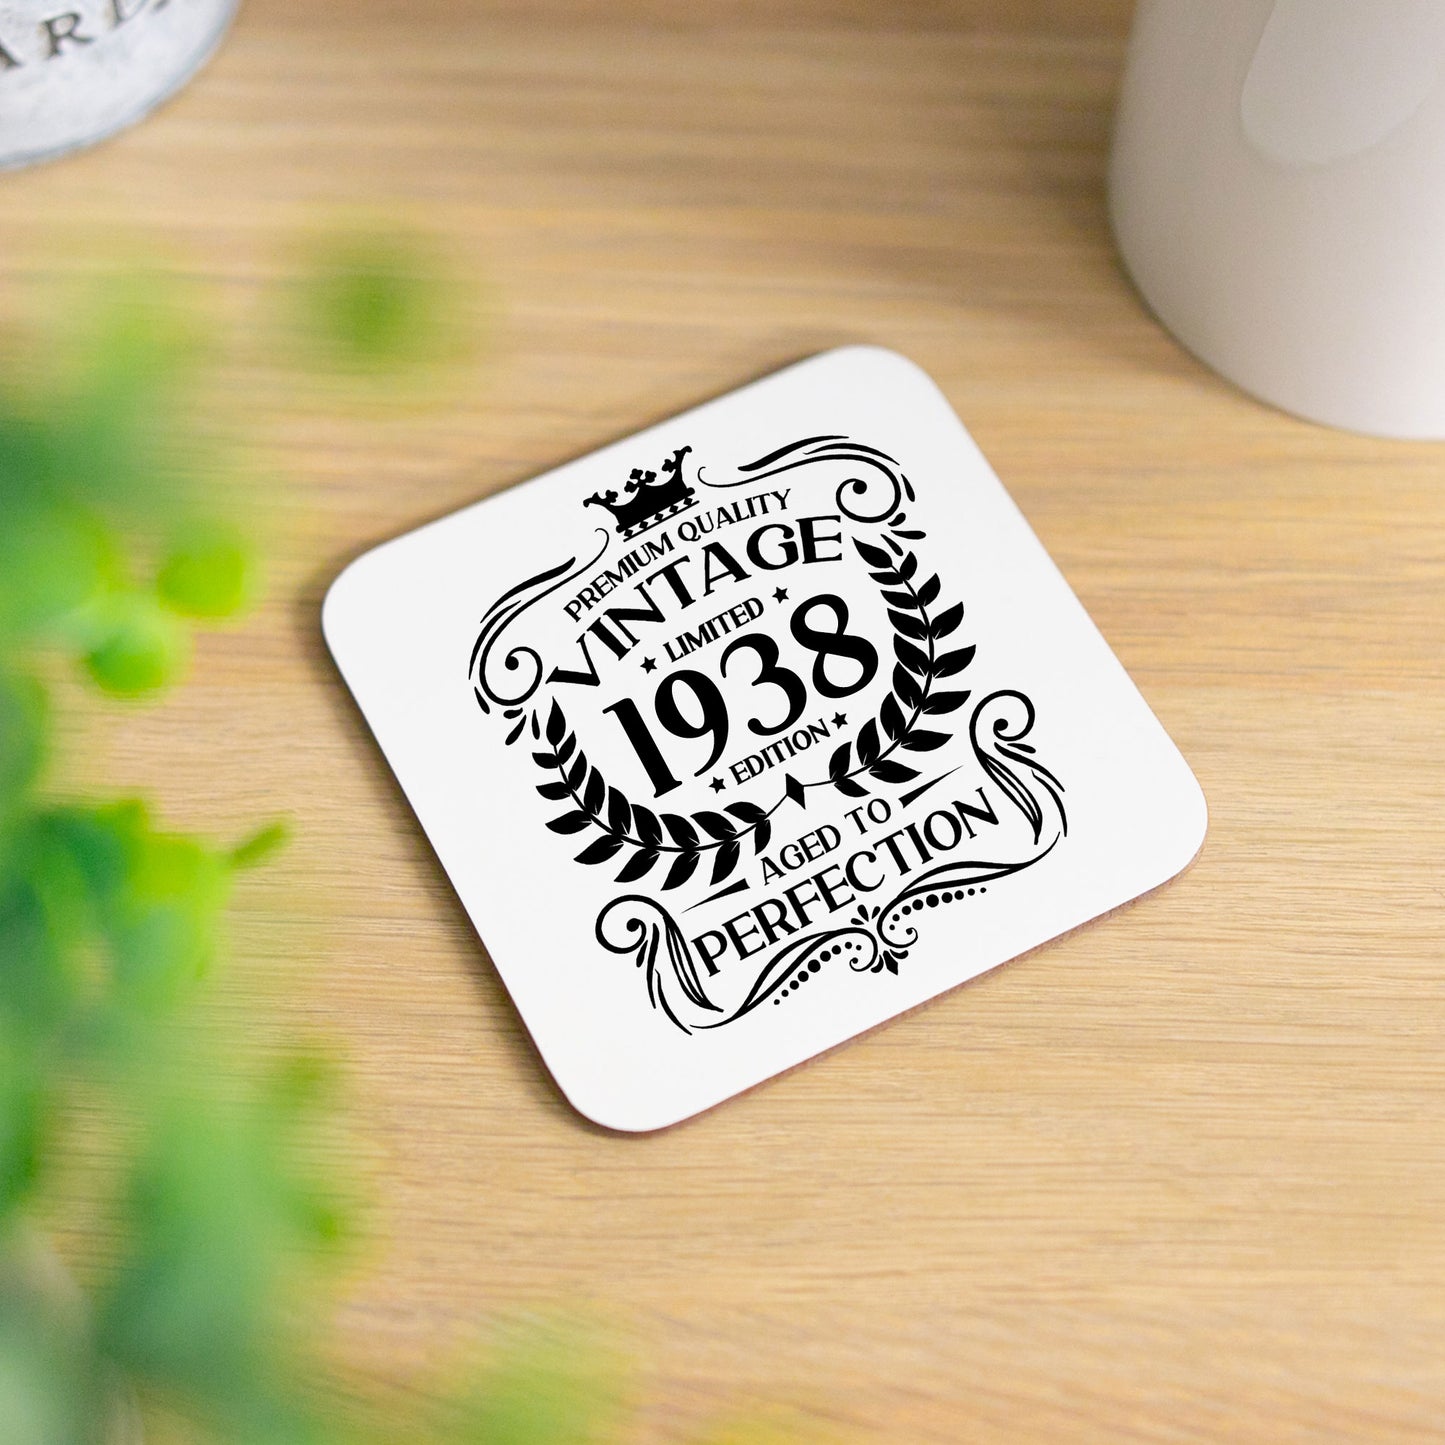 Vintage 1938 85th Birthday Engraved Stemless Gin Glass Gift  - Always Looking Good - Glass & Printed Coaster  